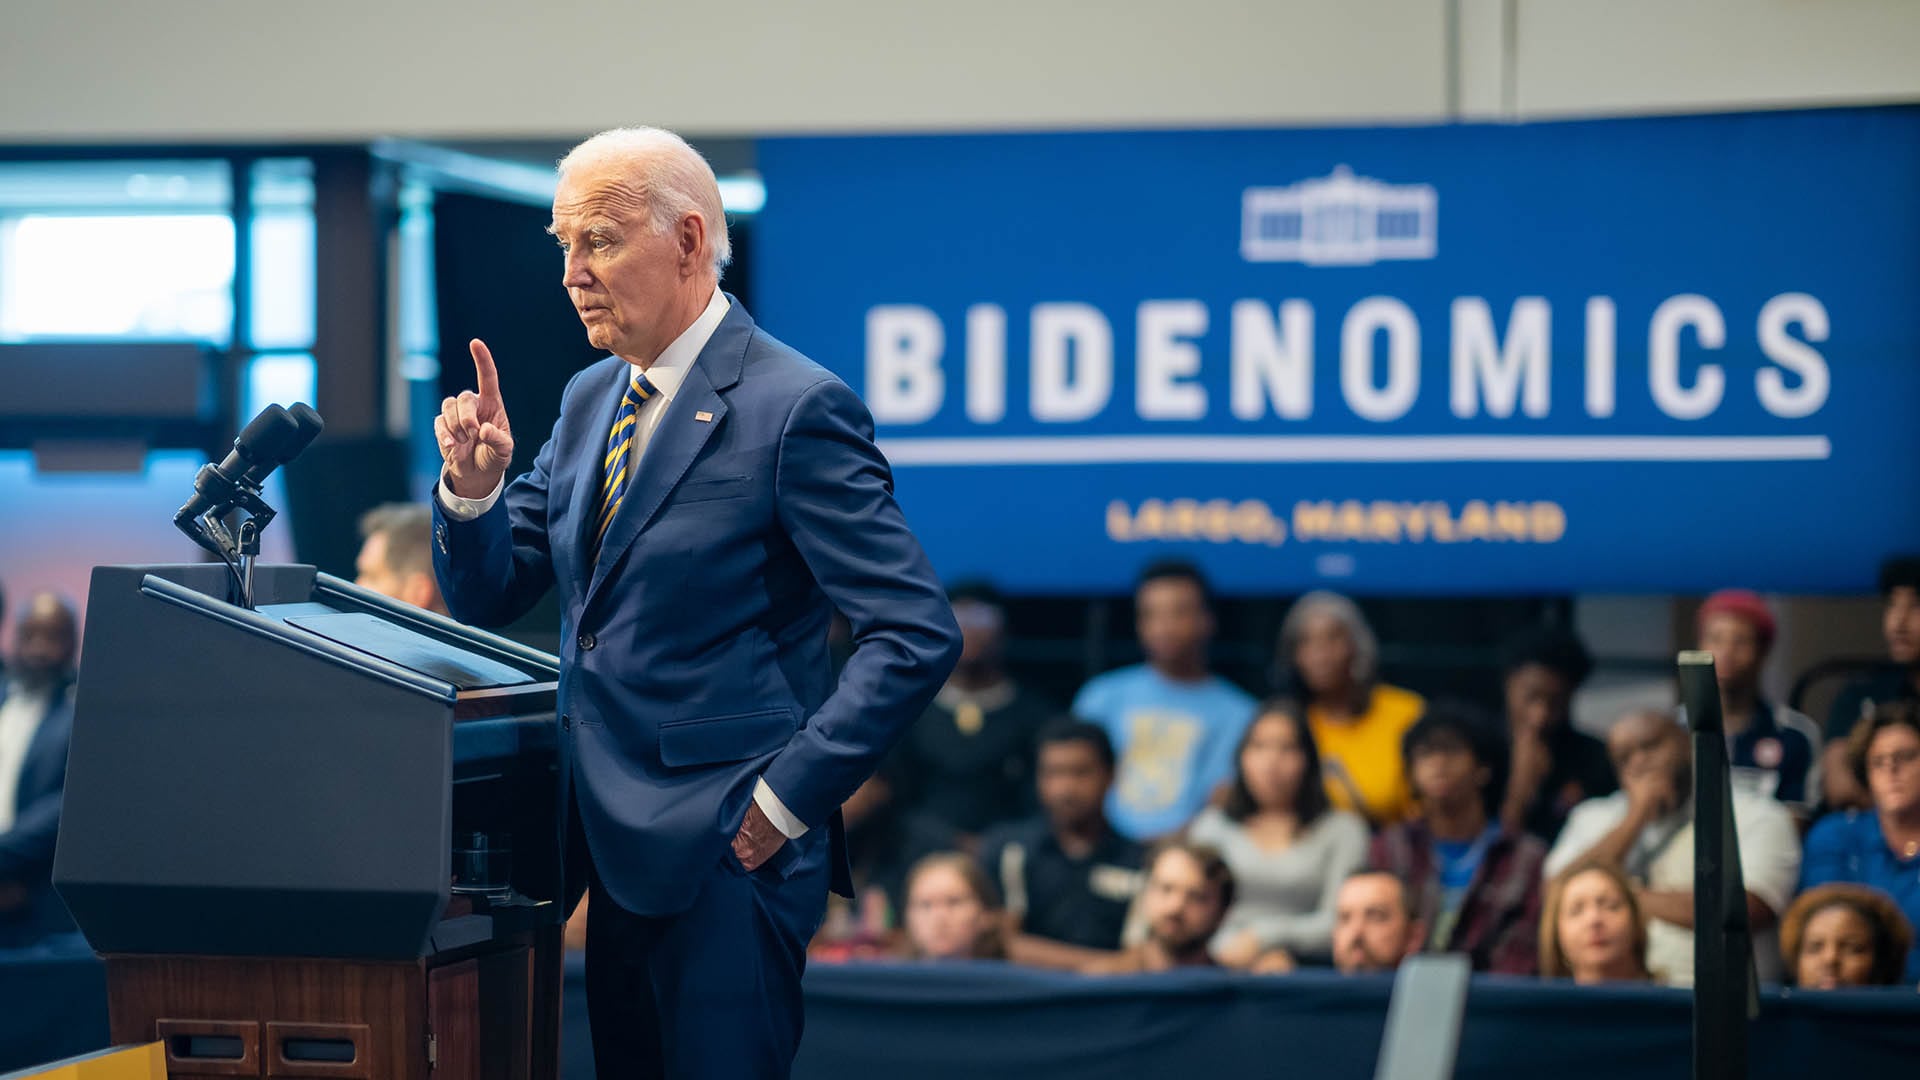 Joe Biden delivers a speech on the U.S. economy and “Bidenomics”, Thursday, September 14, 2023, at Prince George’s Community College in Largo, Maryland.
(Official White House Photo by Adam Schultz)